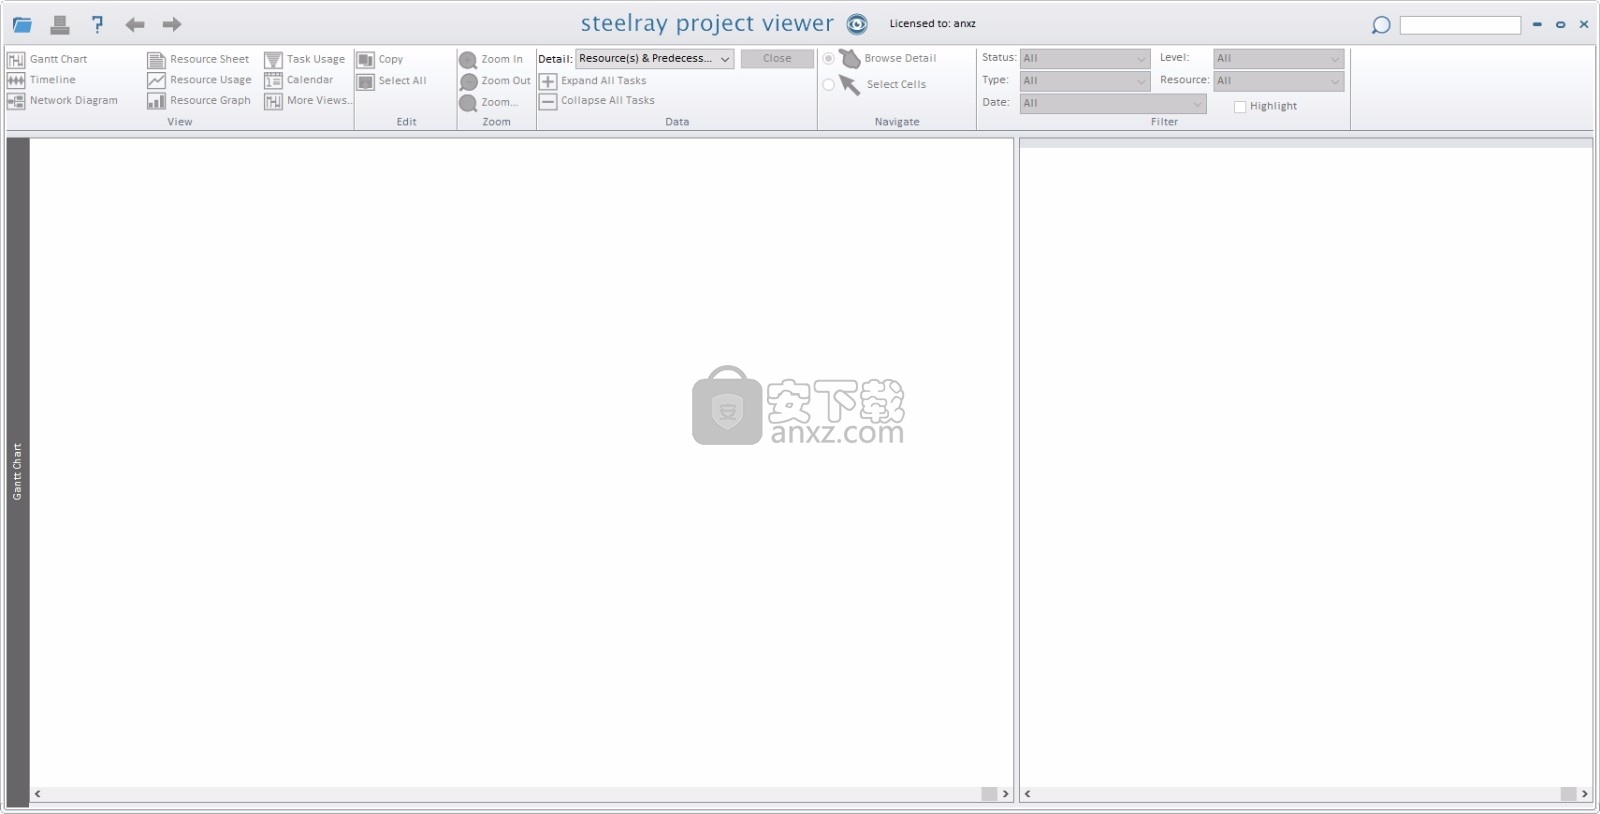 Steelray Project Viewer 6.19 instal the last version for iphone